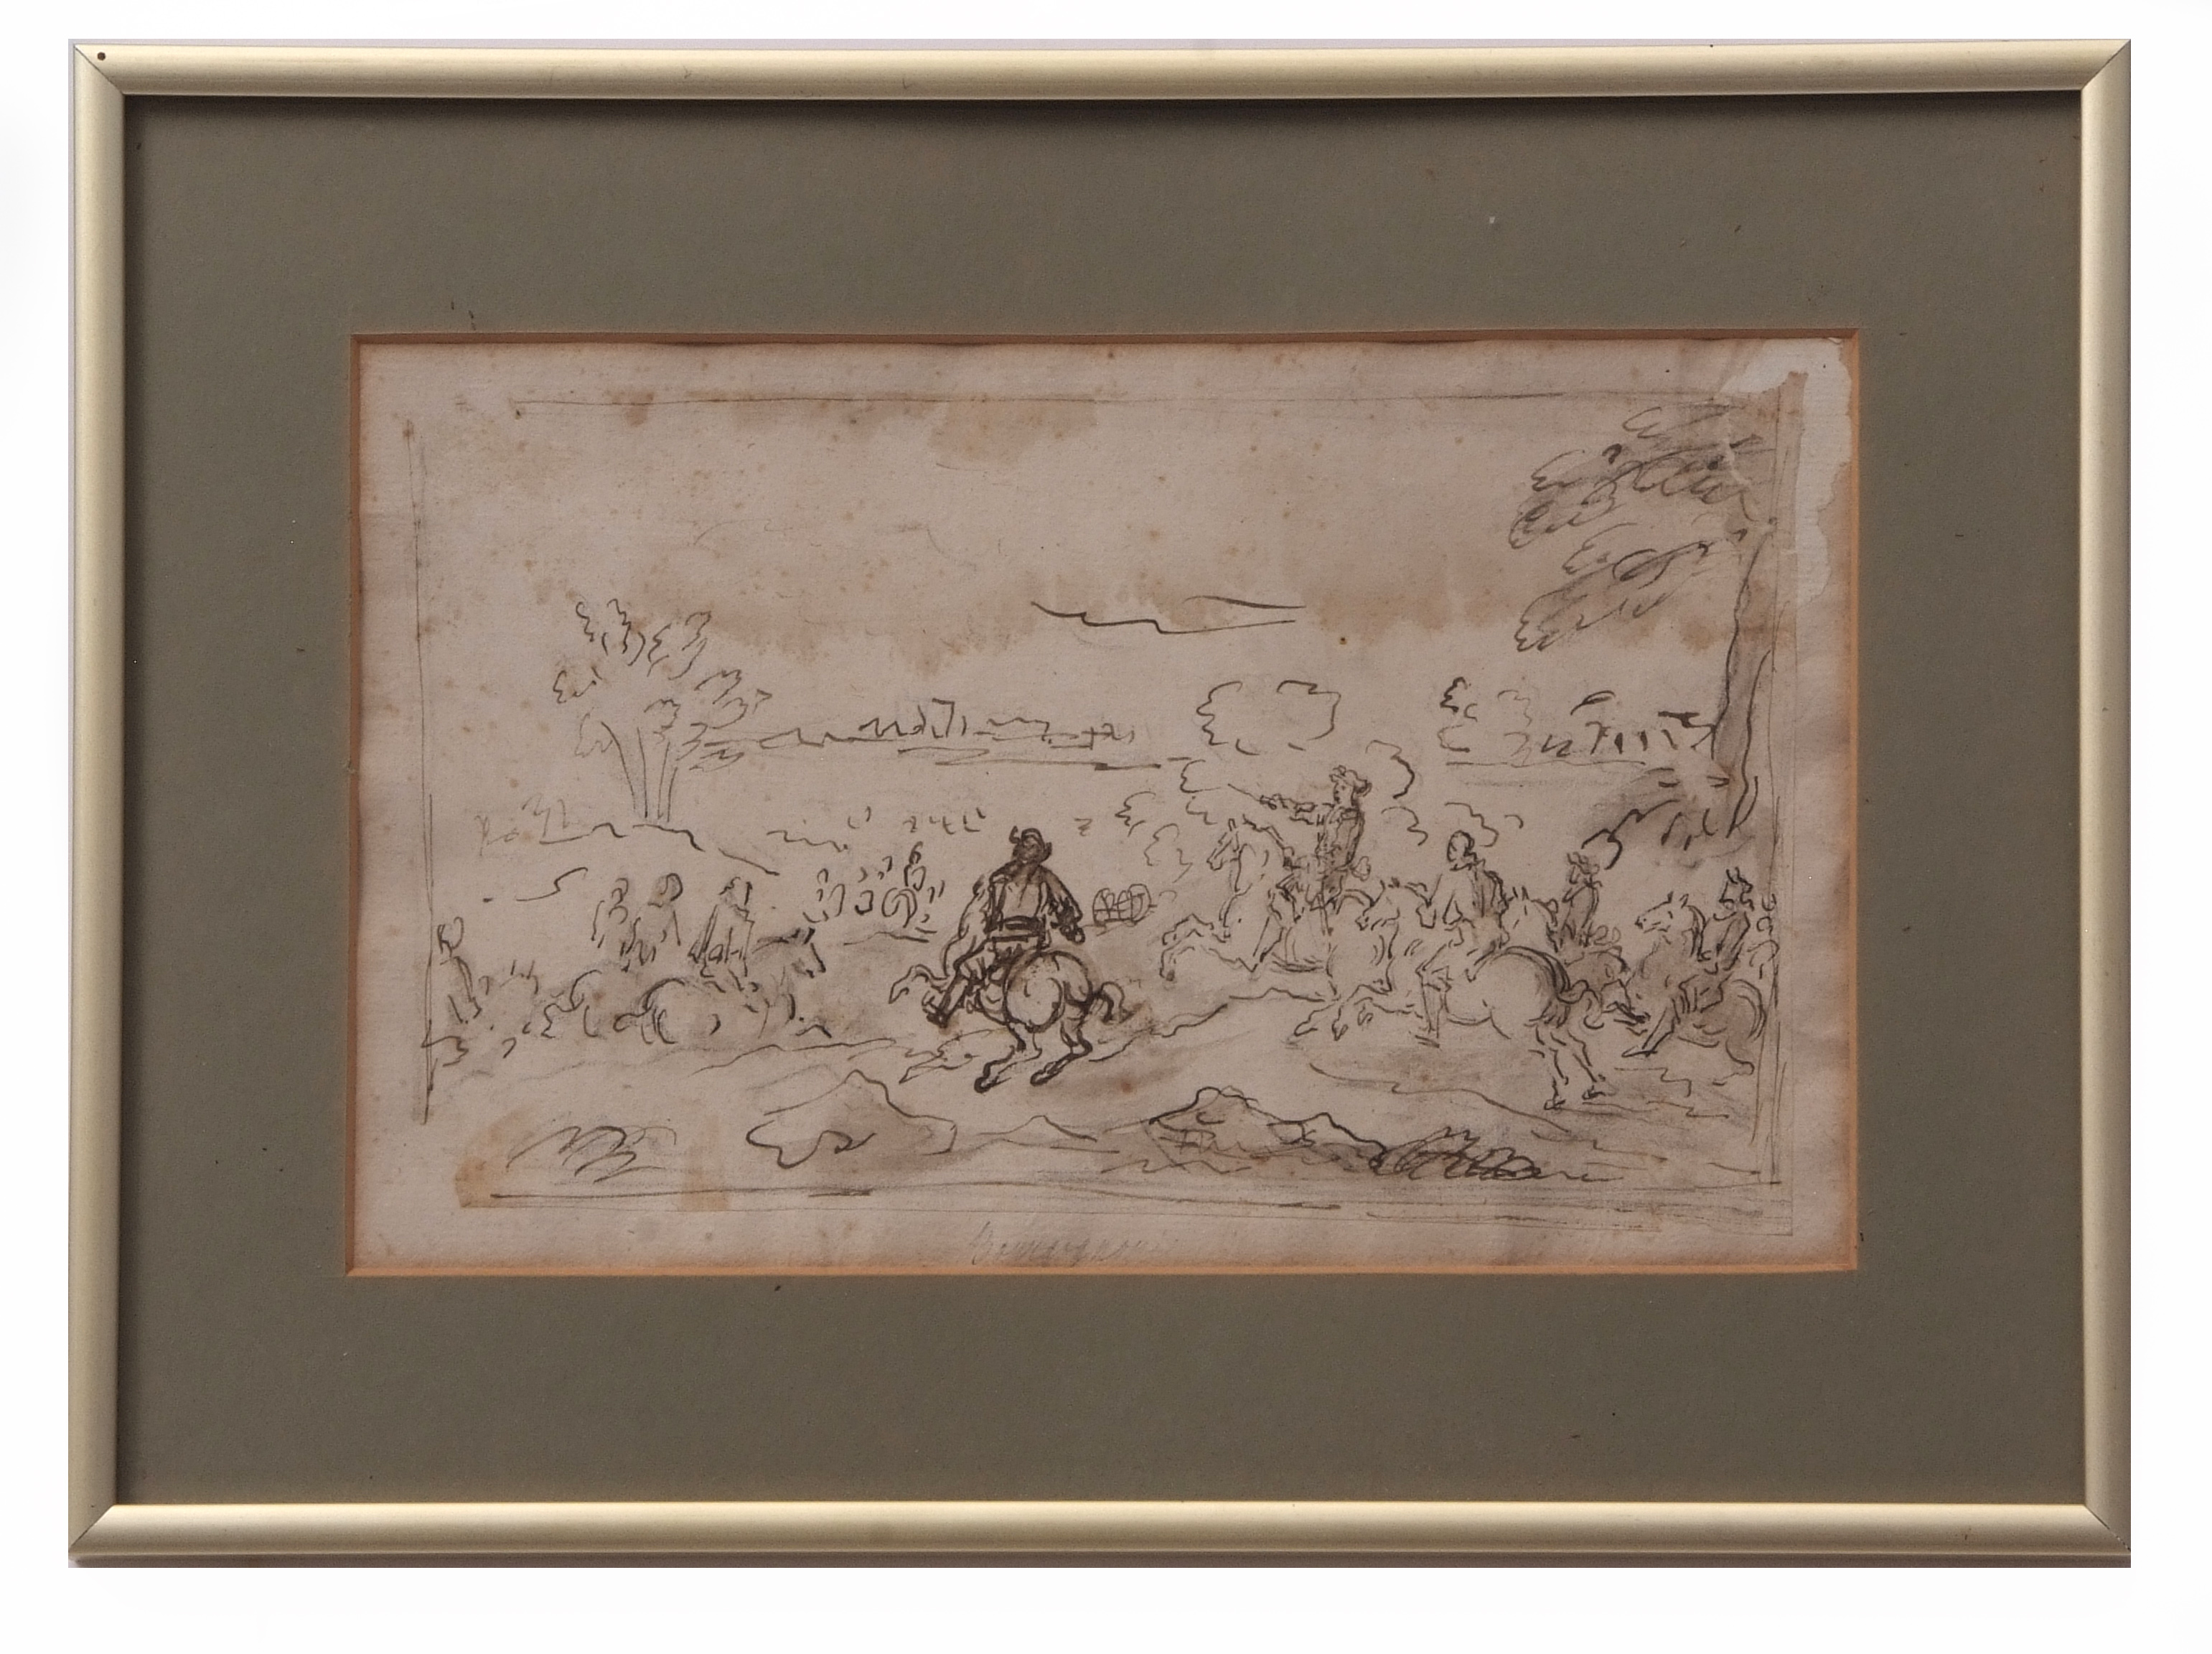 ATTRIBUTED TO FRANCESCO SIMONINI (1686-circa 1755) Landscape with figures on horseback pen and ink - Image 2 of 2